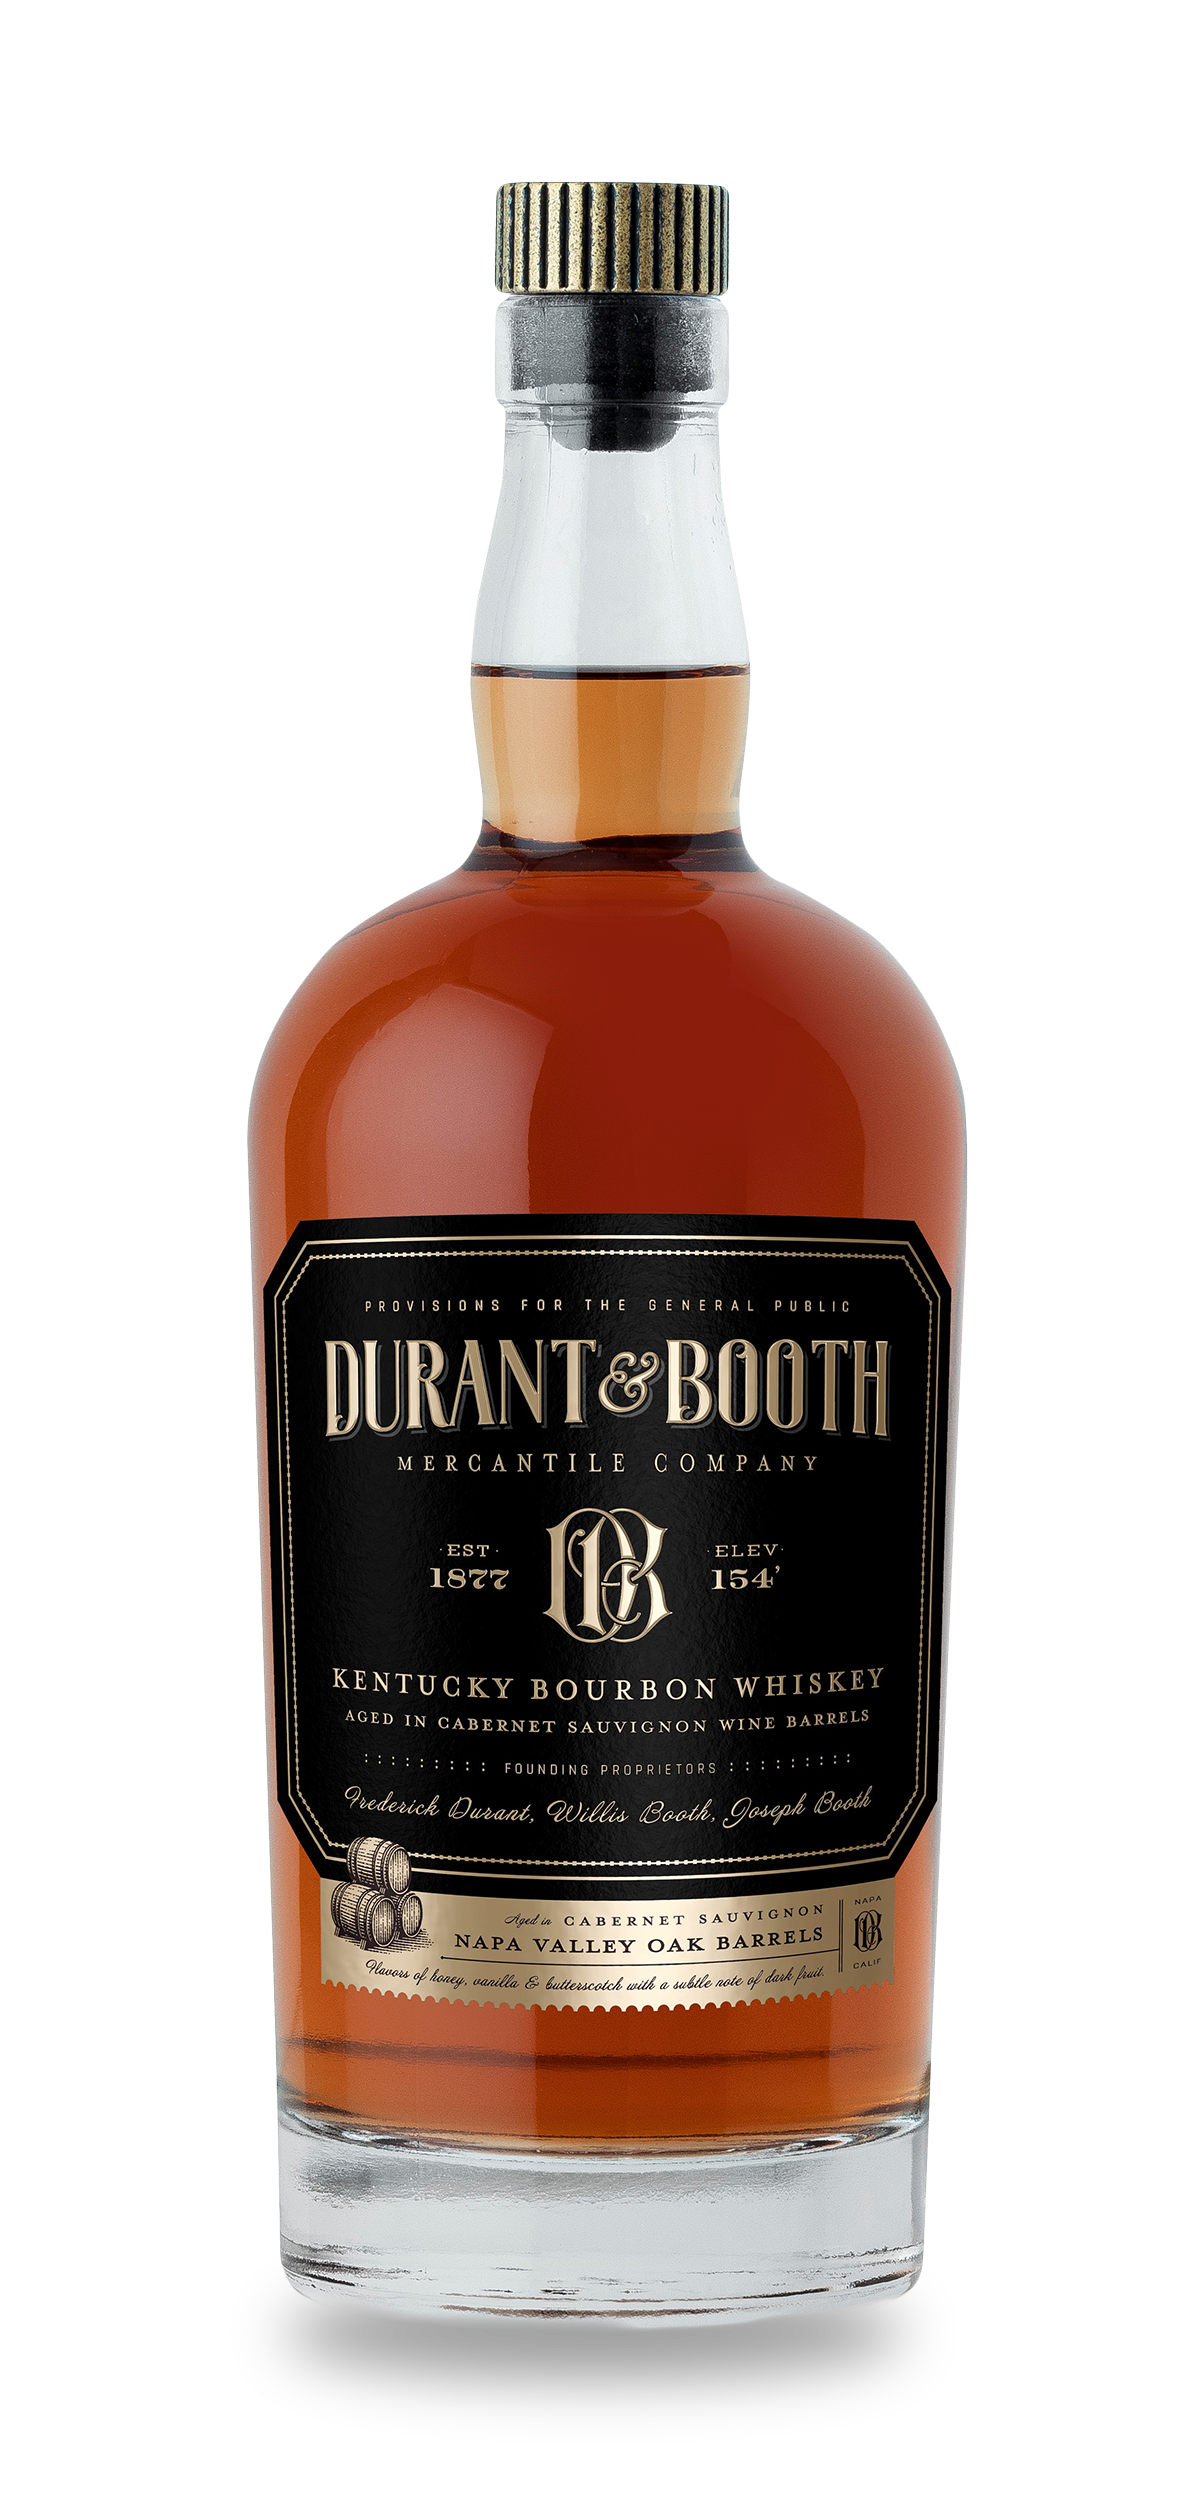 Image of a bottle of Durant and Booth Kentucky Bourbon Whiskey